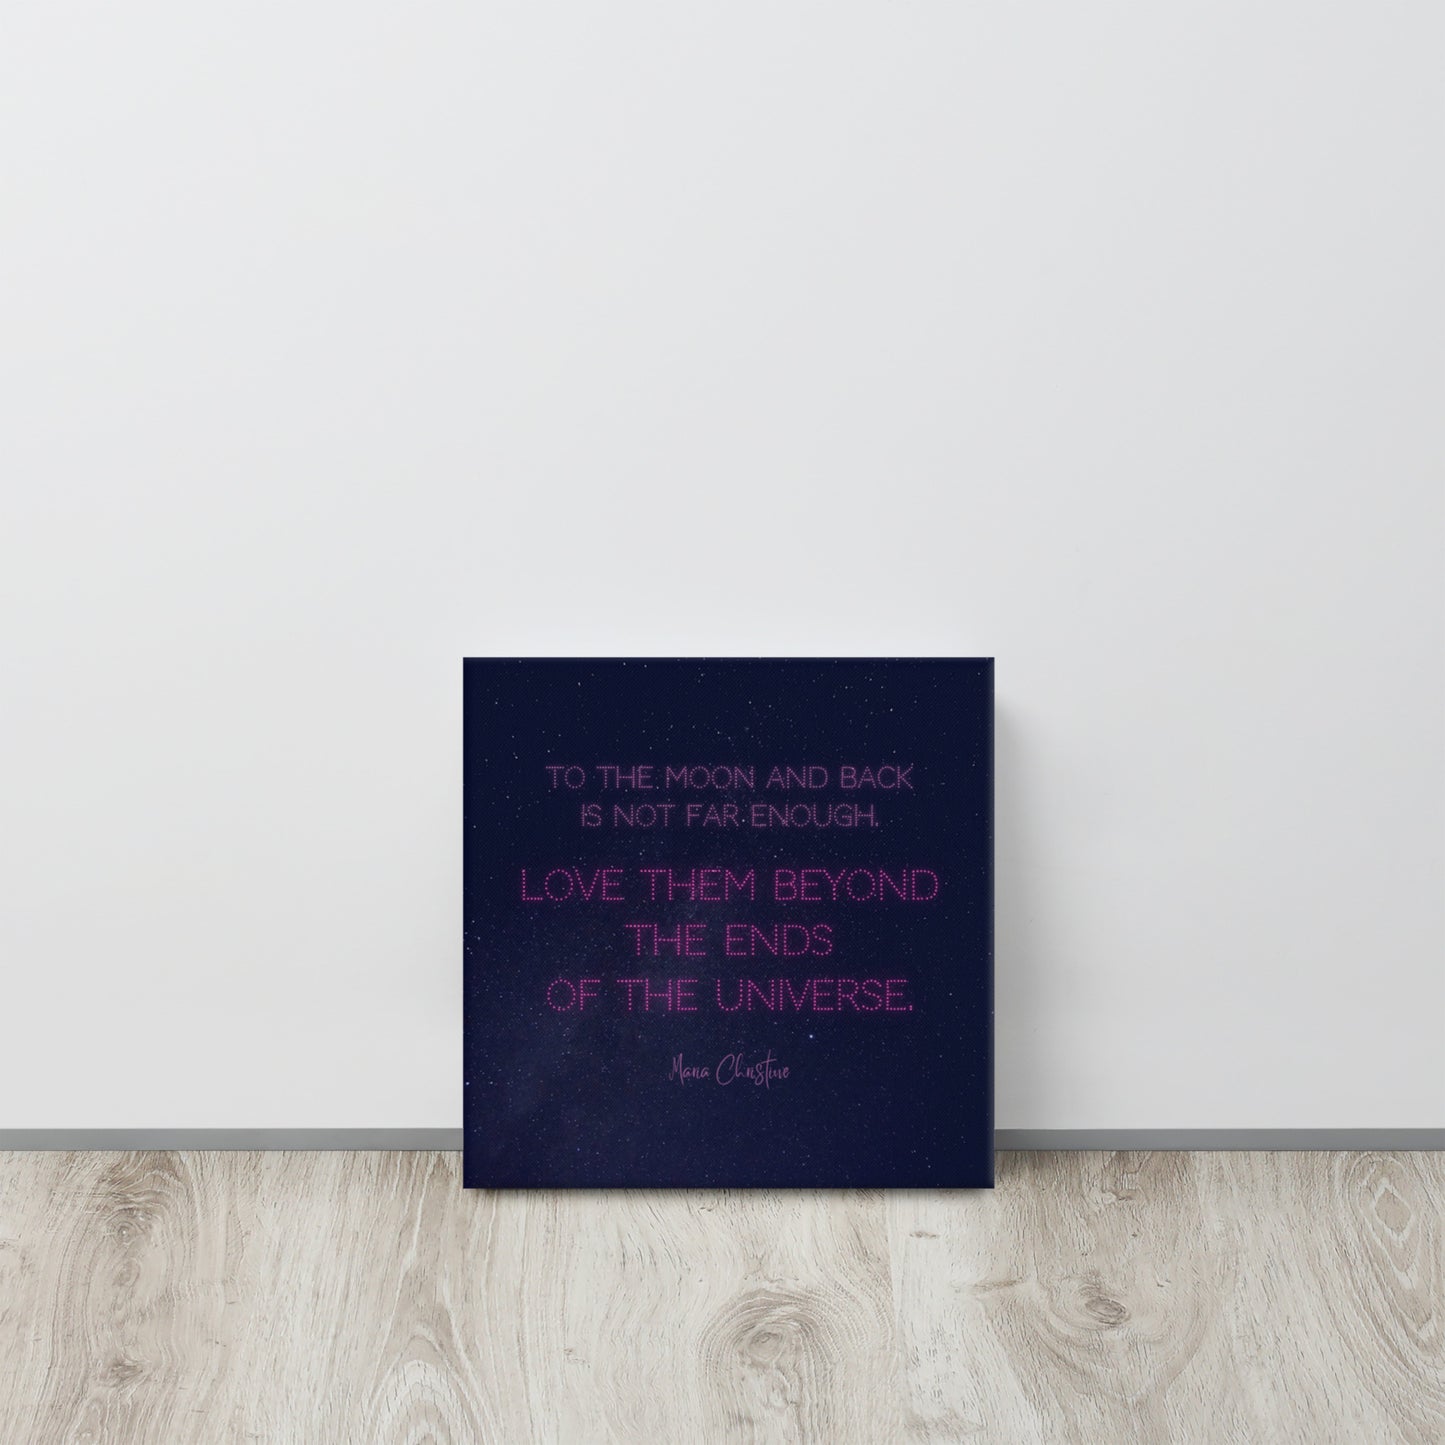 Canvas Art: Love Them Beyond... by Maria Christine  (pink text)